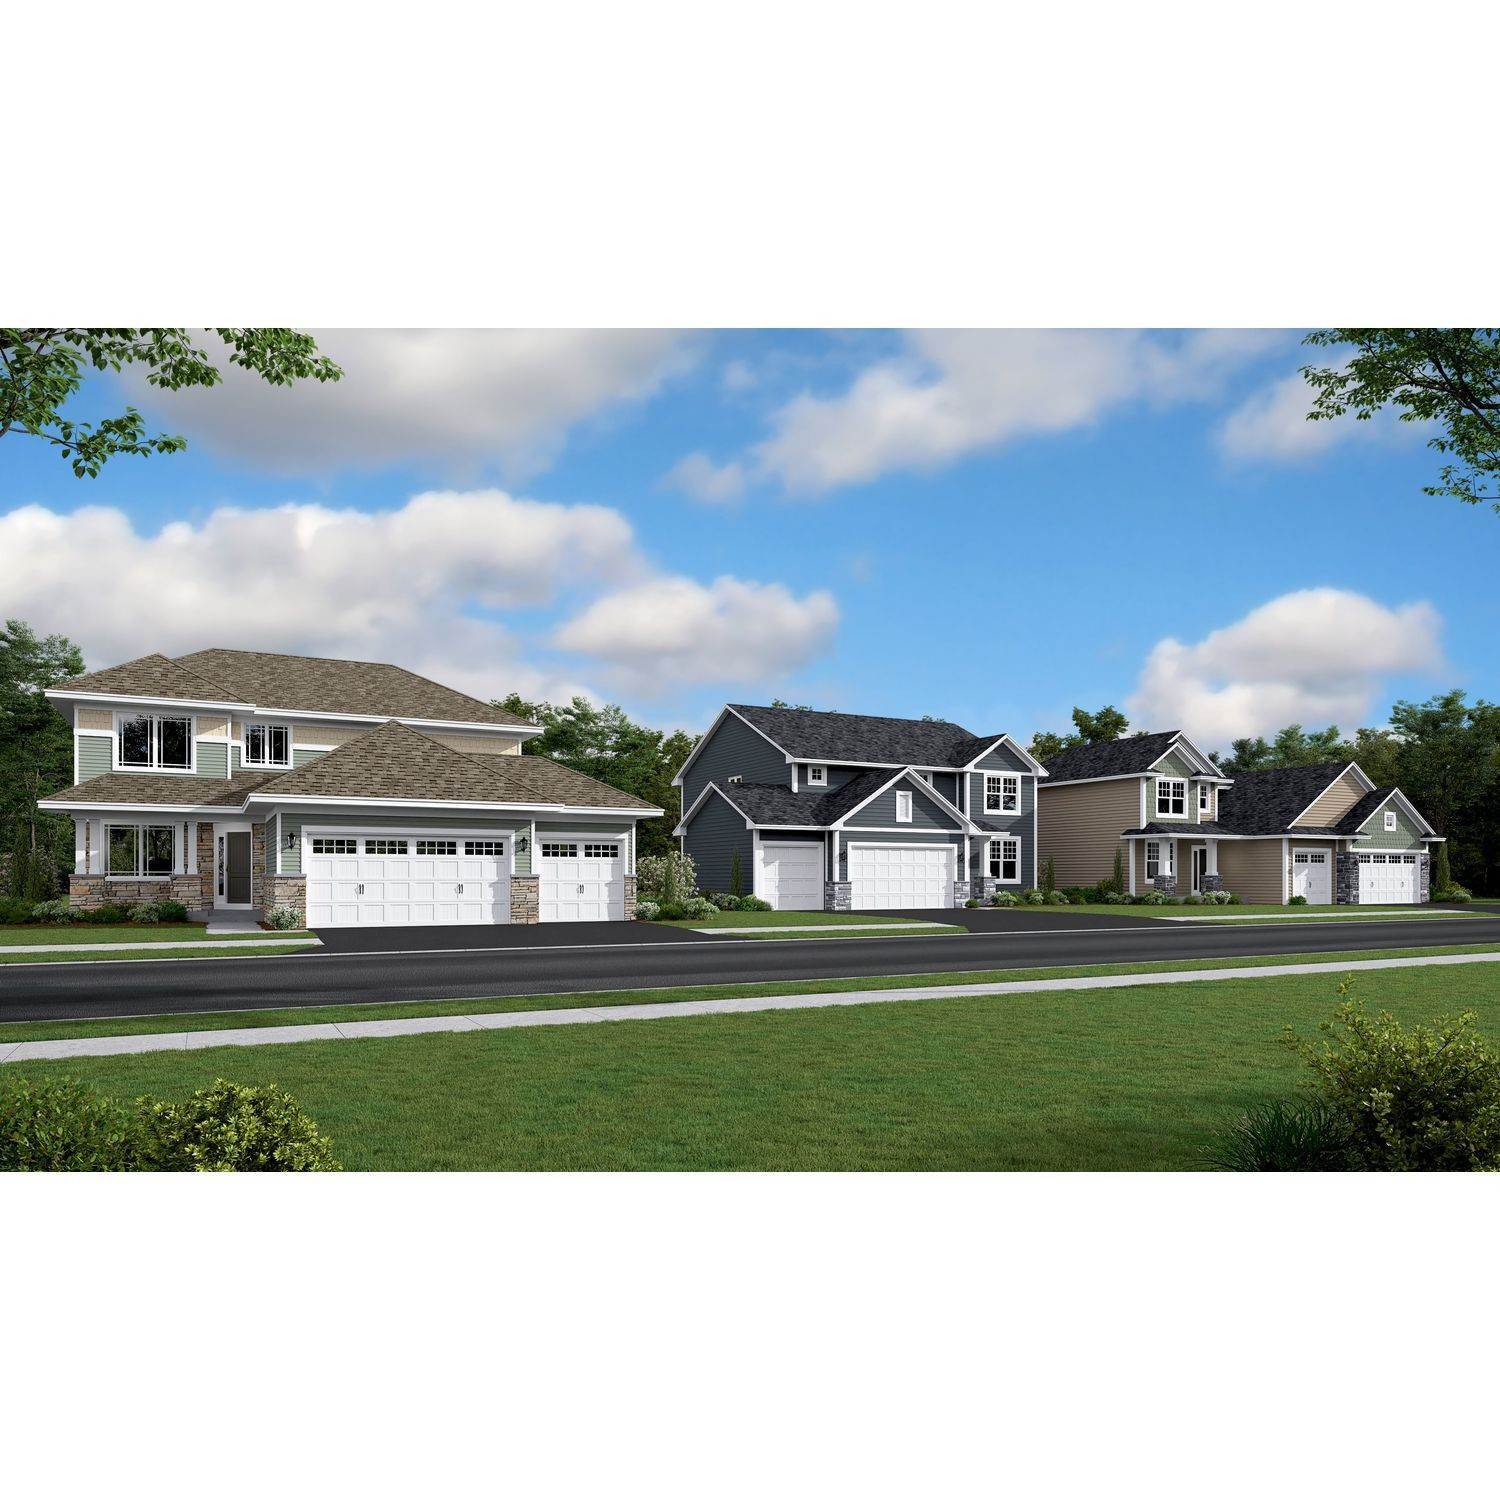 5. River Pointe - The Meadows of River Pointe κτίριο σε 17754 54th St NE, Otsego, MN 55374